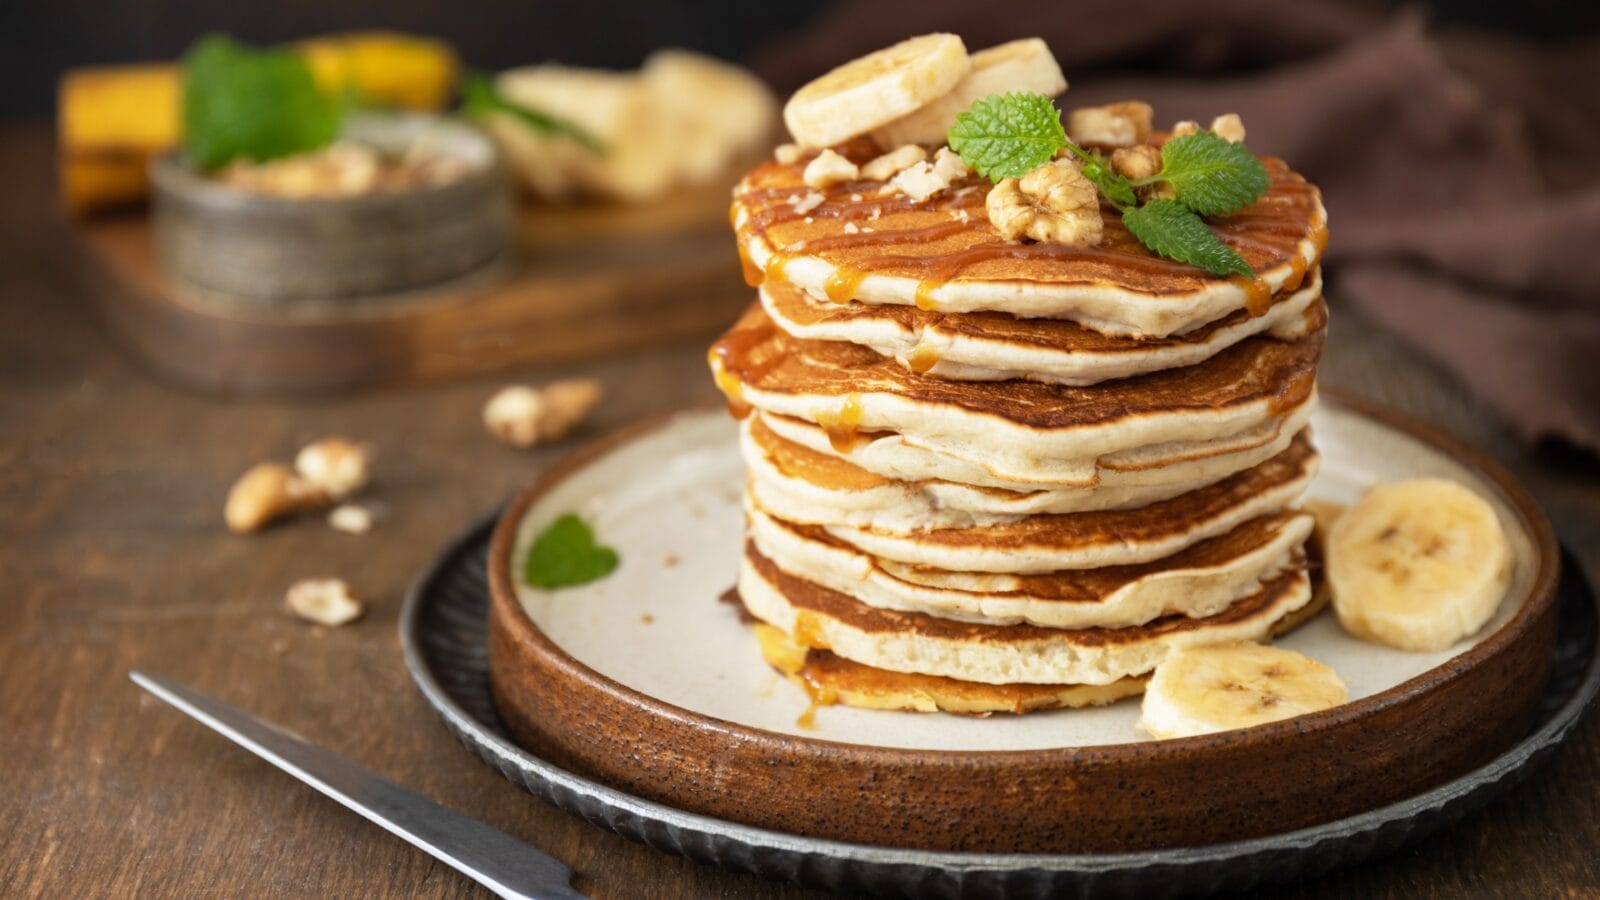 Delicious homemade banana pancakes with nuts and caramel on rustic wooden table.